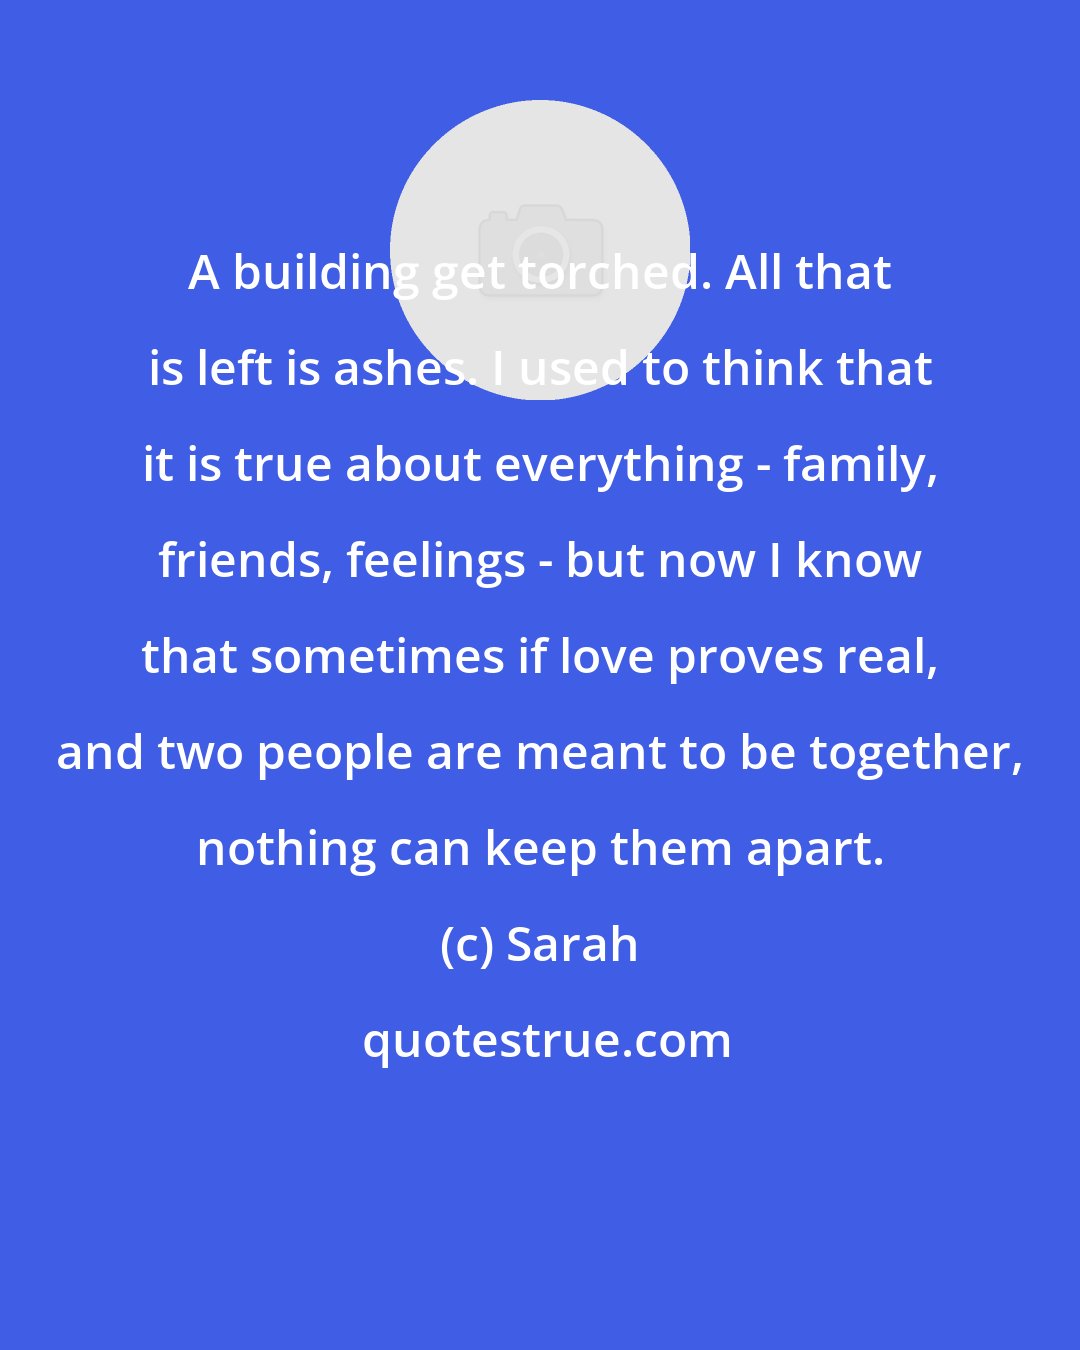 Sarah: A building get torched. All that is left is ashes. I used to think that it is true about everything - family, friends, feelings - but now I know that sometimes if love proves real, and two people are meant to be together, nothing can keep them apart.